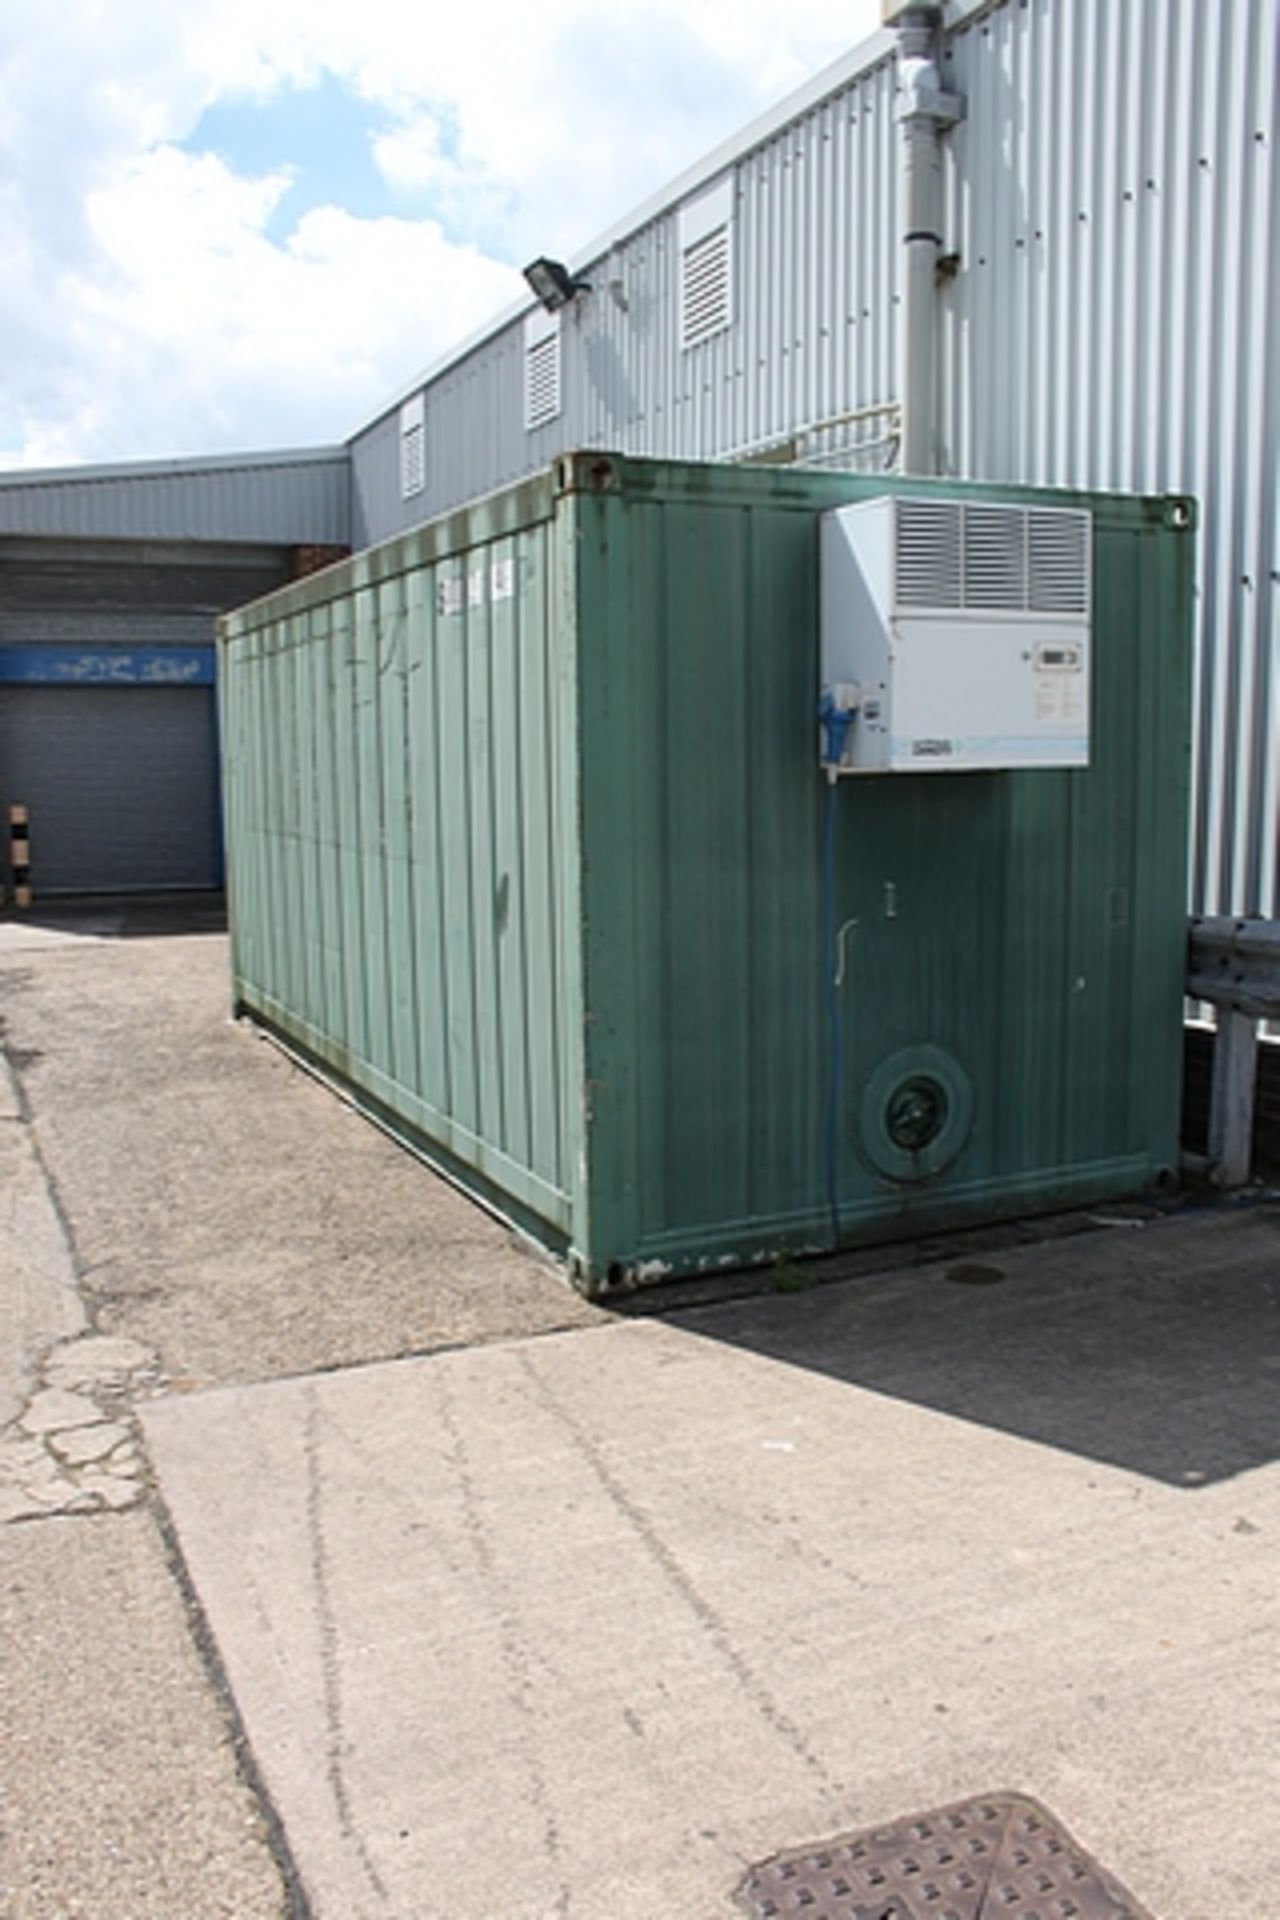 Portable Refrigeration Storage Container 20ft x 8ft container with interior cladding set up to